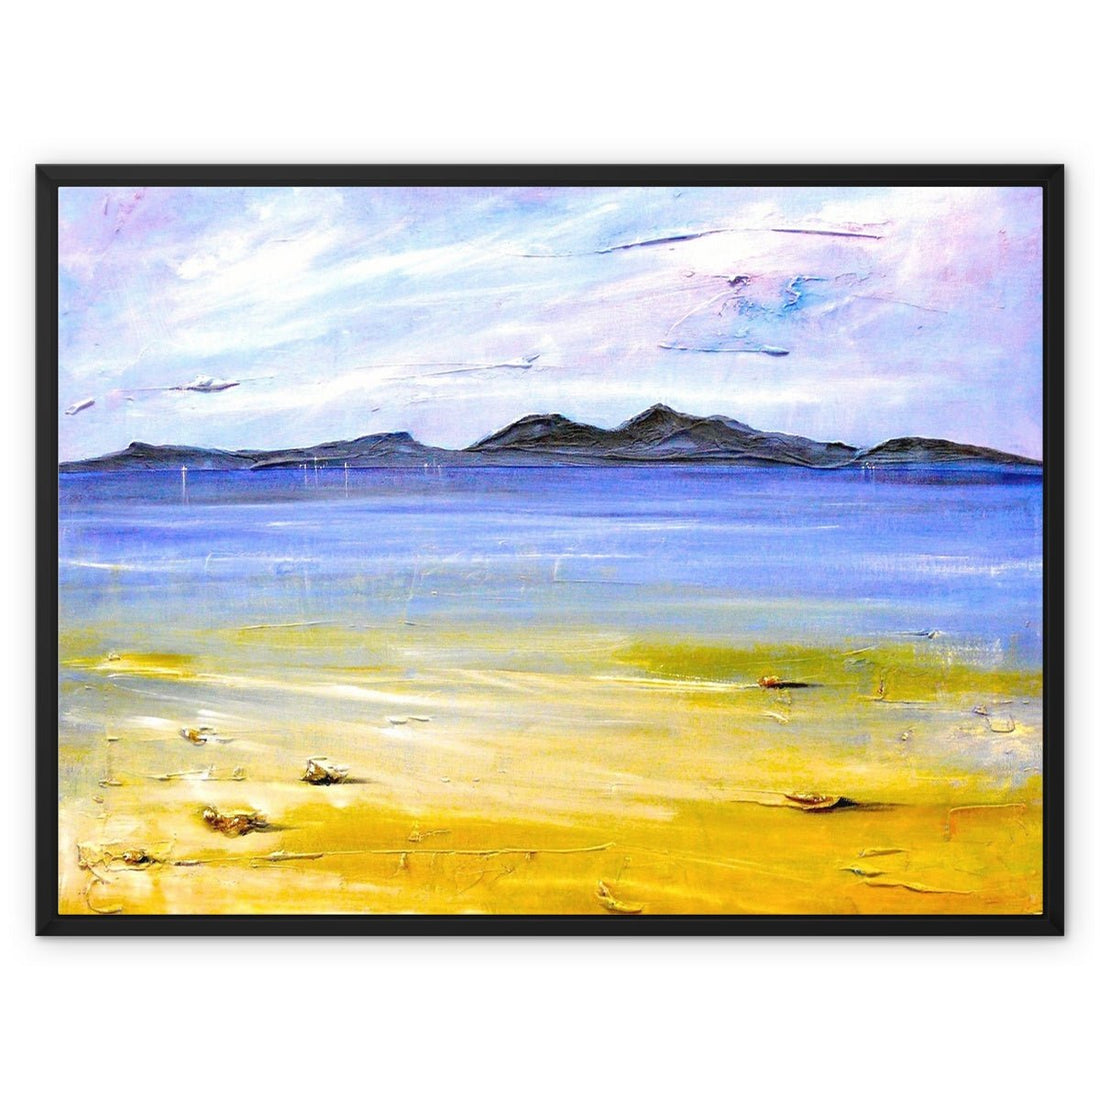 Camusdarach Beach Arisaig Painting | Framed Canvas | Paintings from Scotland by Scottish Artist Hunter